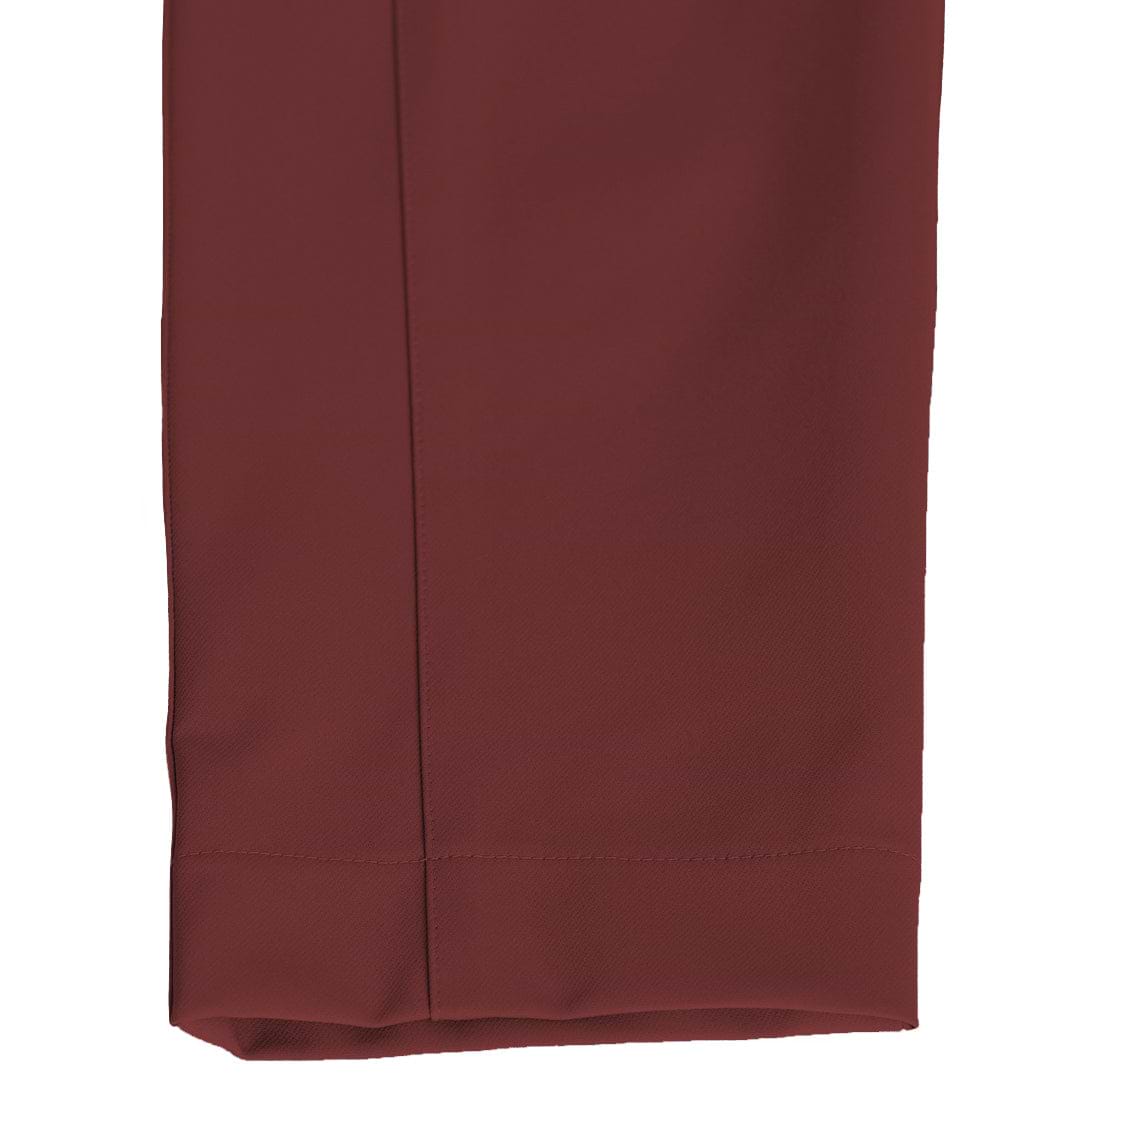 Athletic Fit Stretch Tech Chino - Maroon